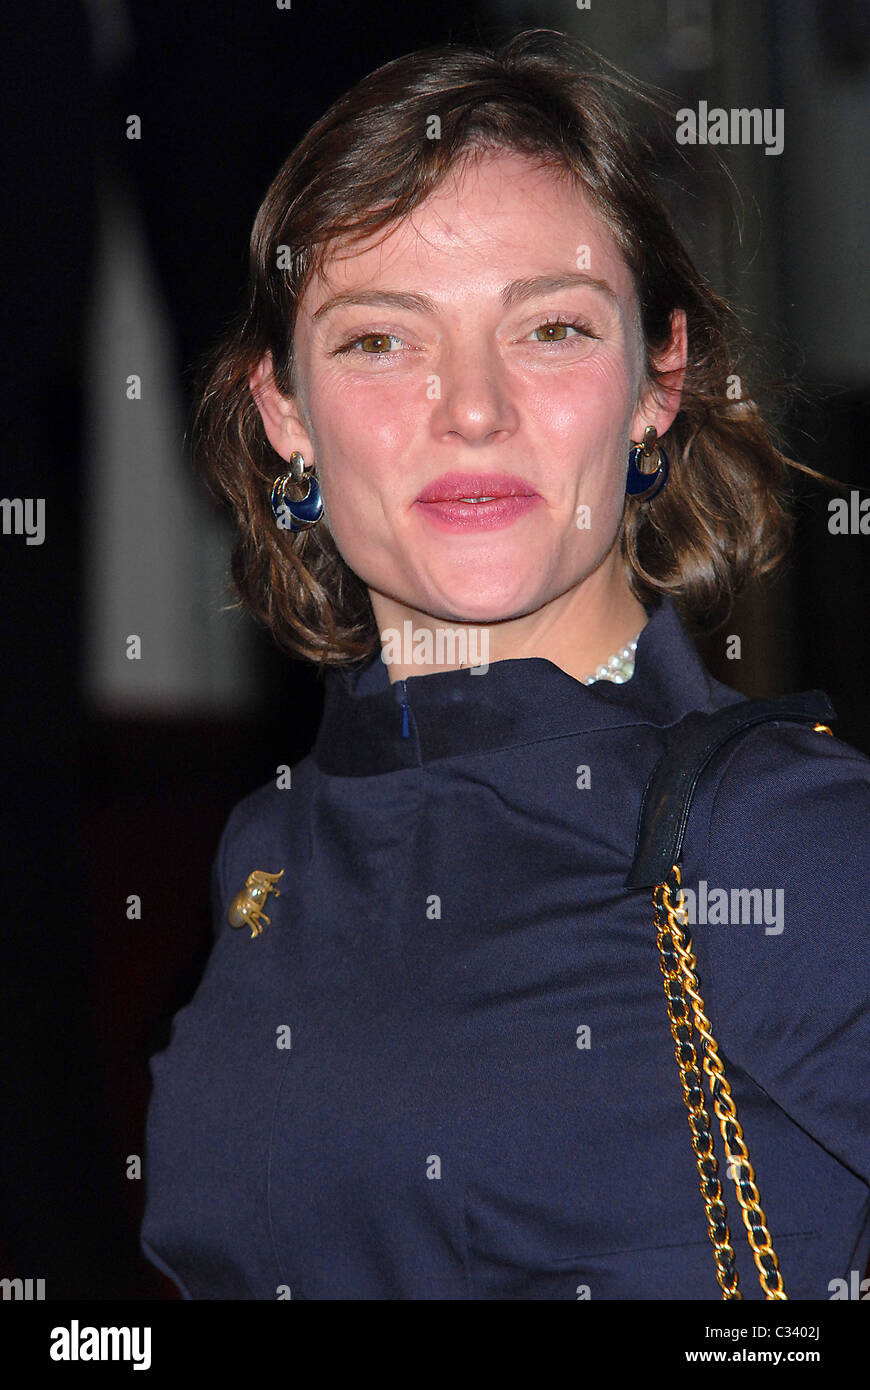 Camilla Rutherford Revolutionary Road UK film premiere held at the ...